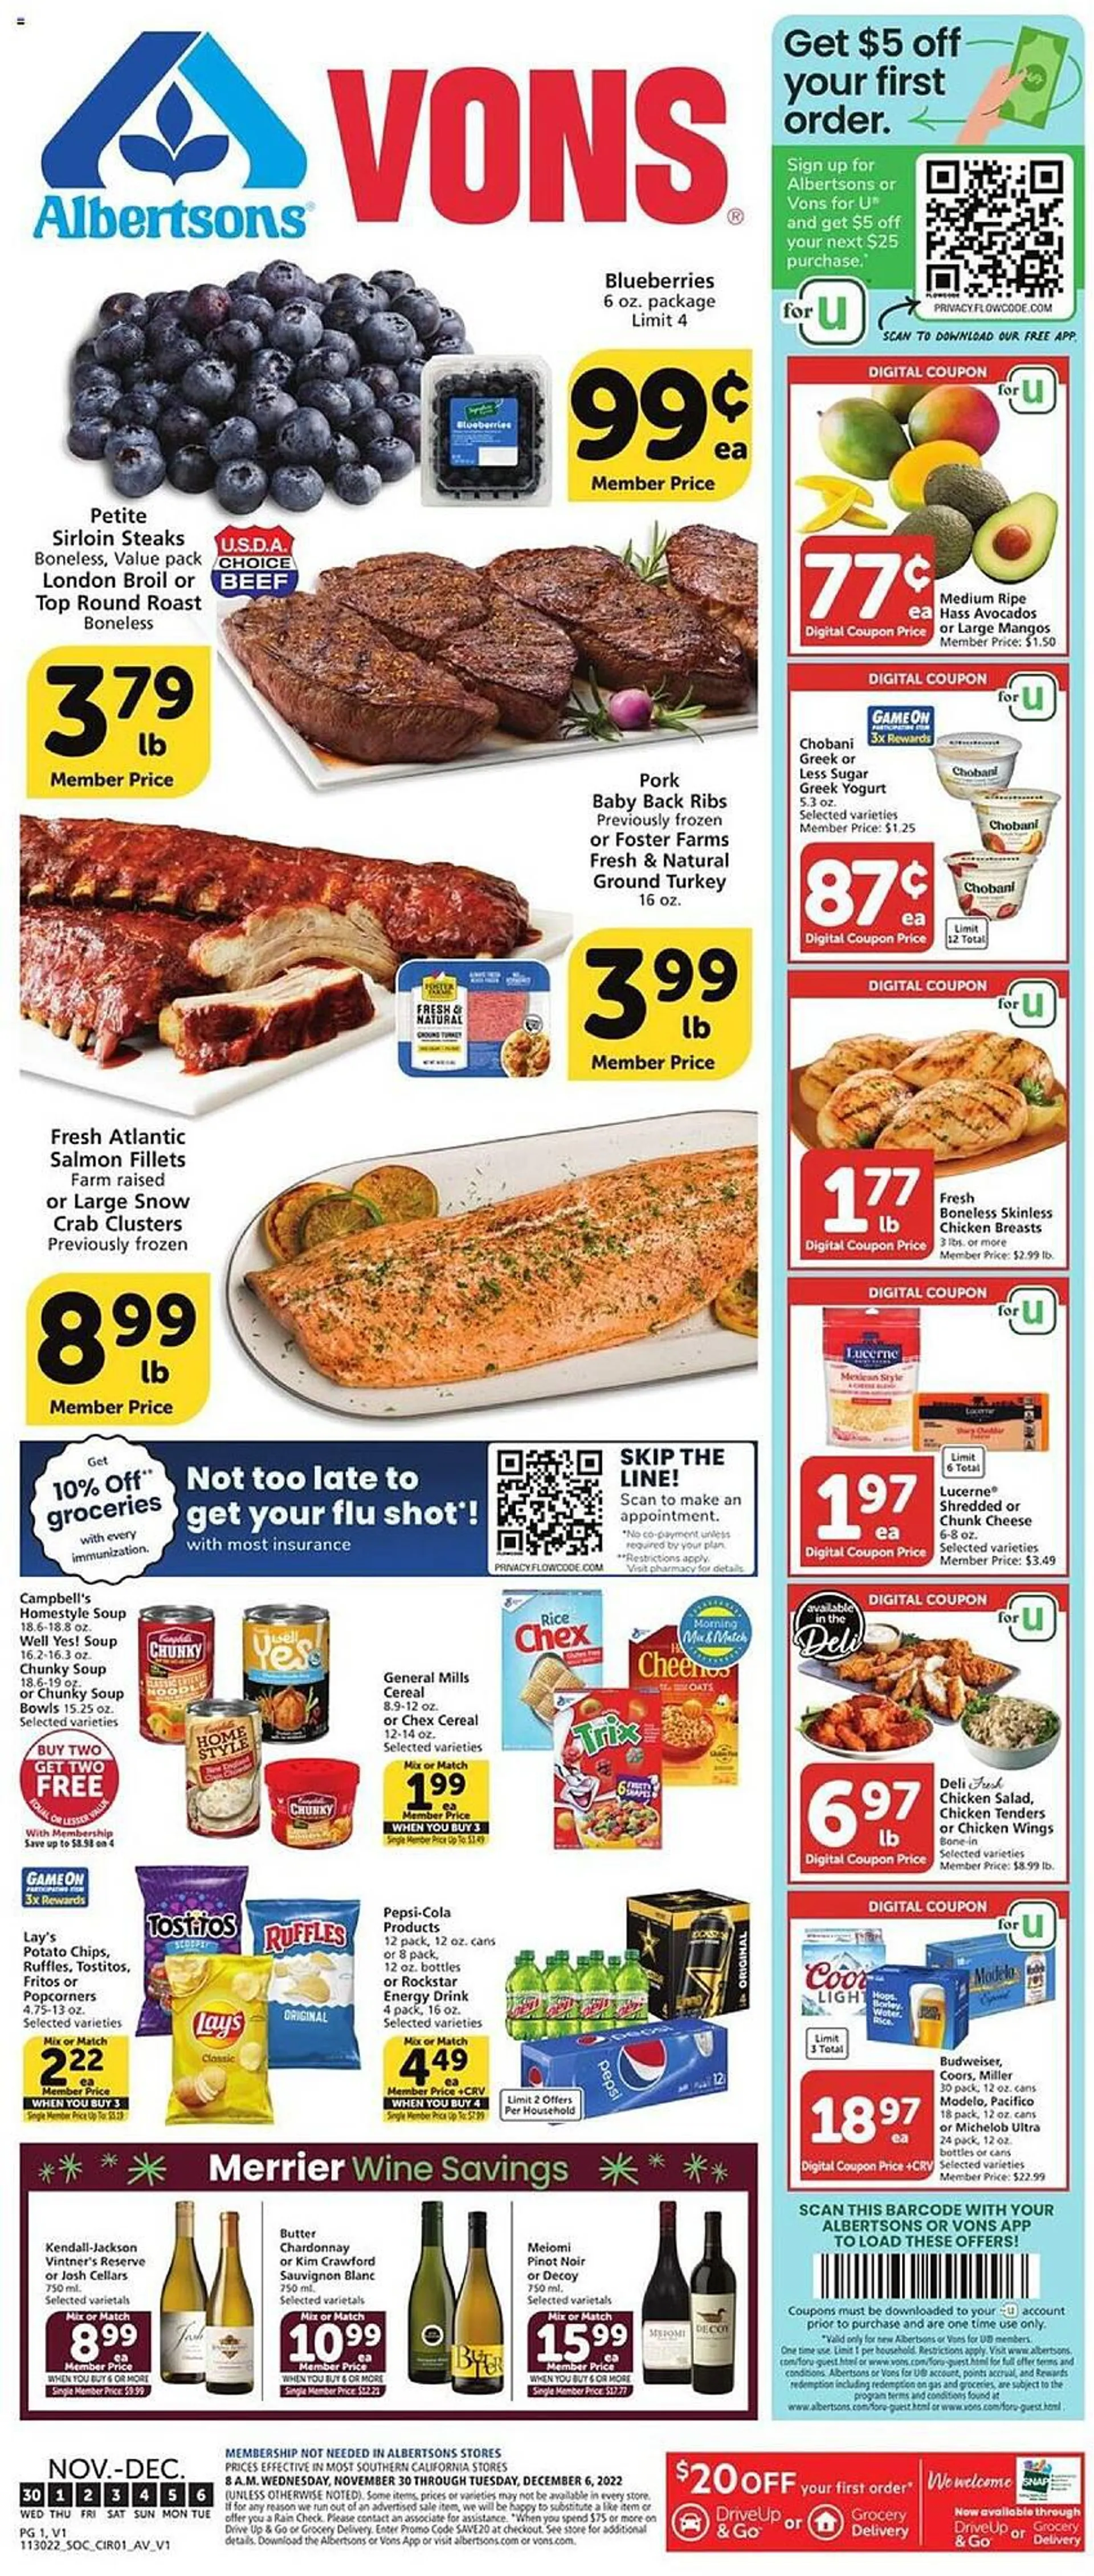 Vons Weekly Ad - 1